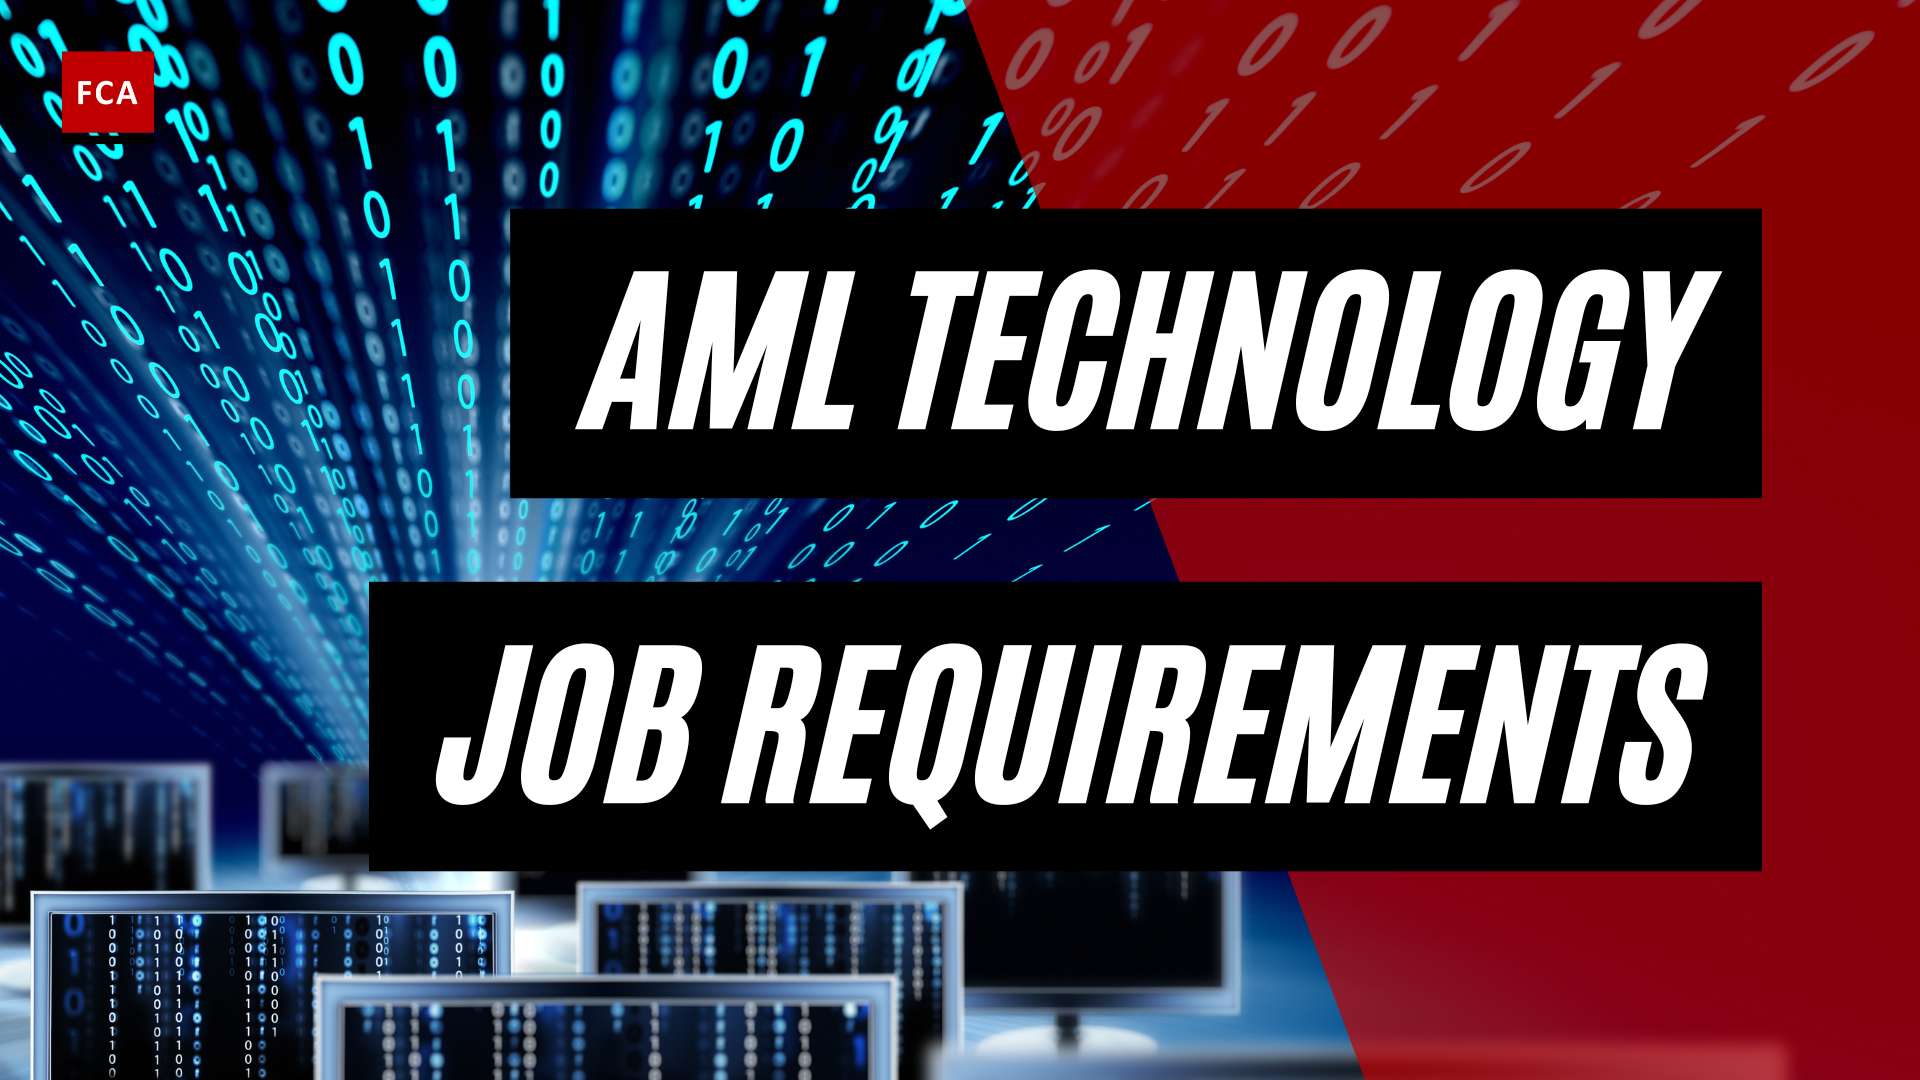 Future-Proof Your Aml Career: Aml Technology Job Requirements Revealed